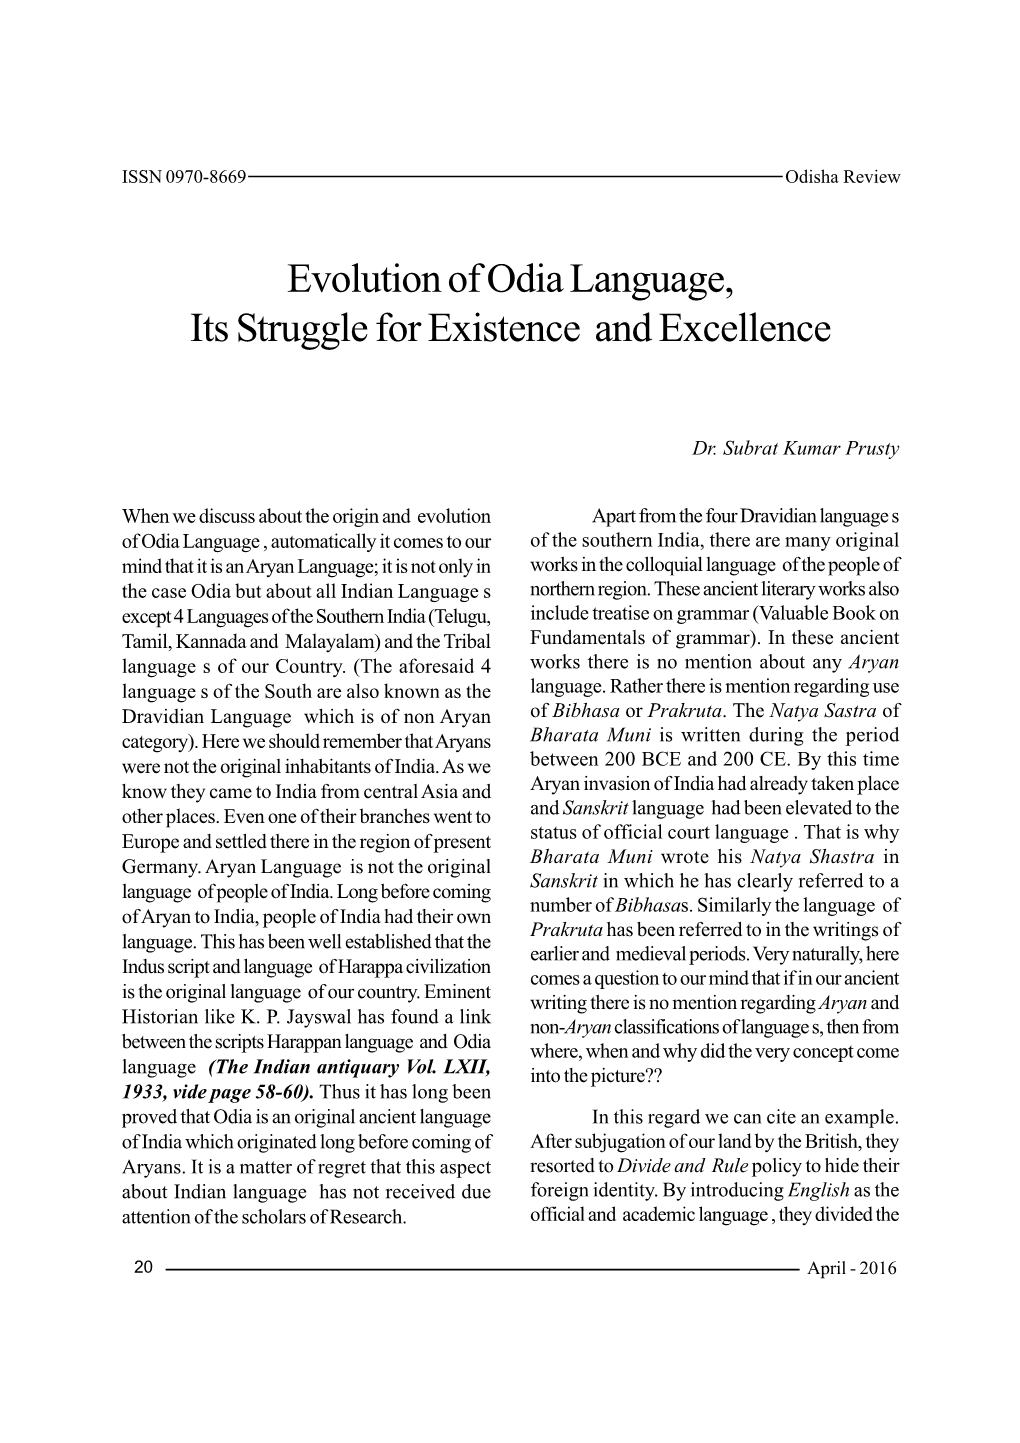 Evolution of Odia Language, Its Struggle for Existence and Excellence